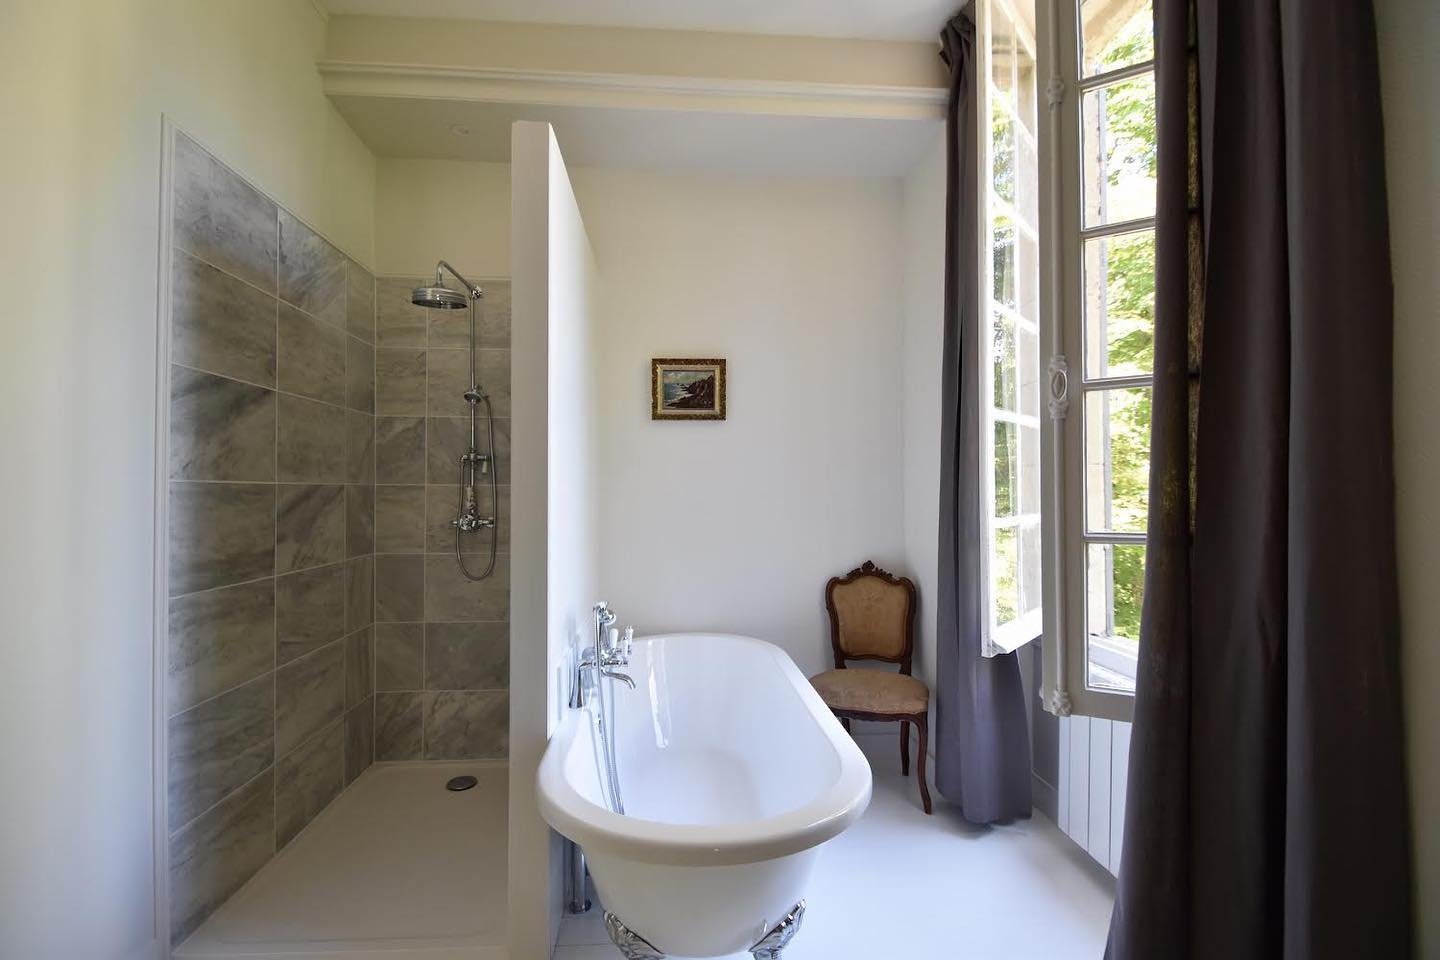 All rooms have roll top baths most positioned near windows for enjoying the leafy views #manoirdeplaisance